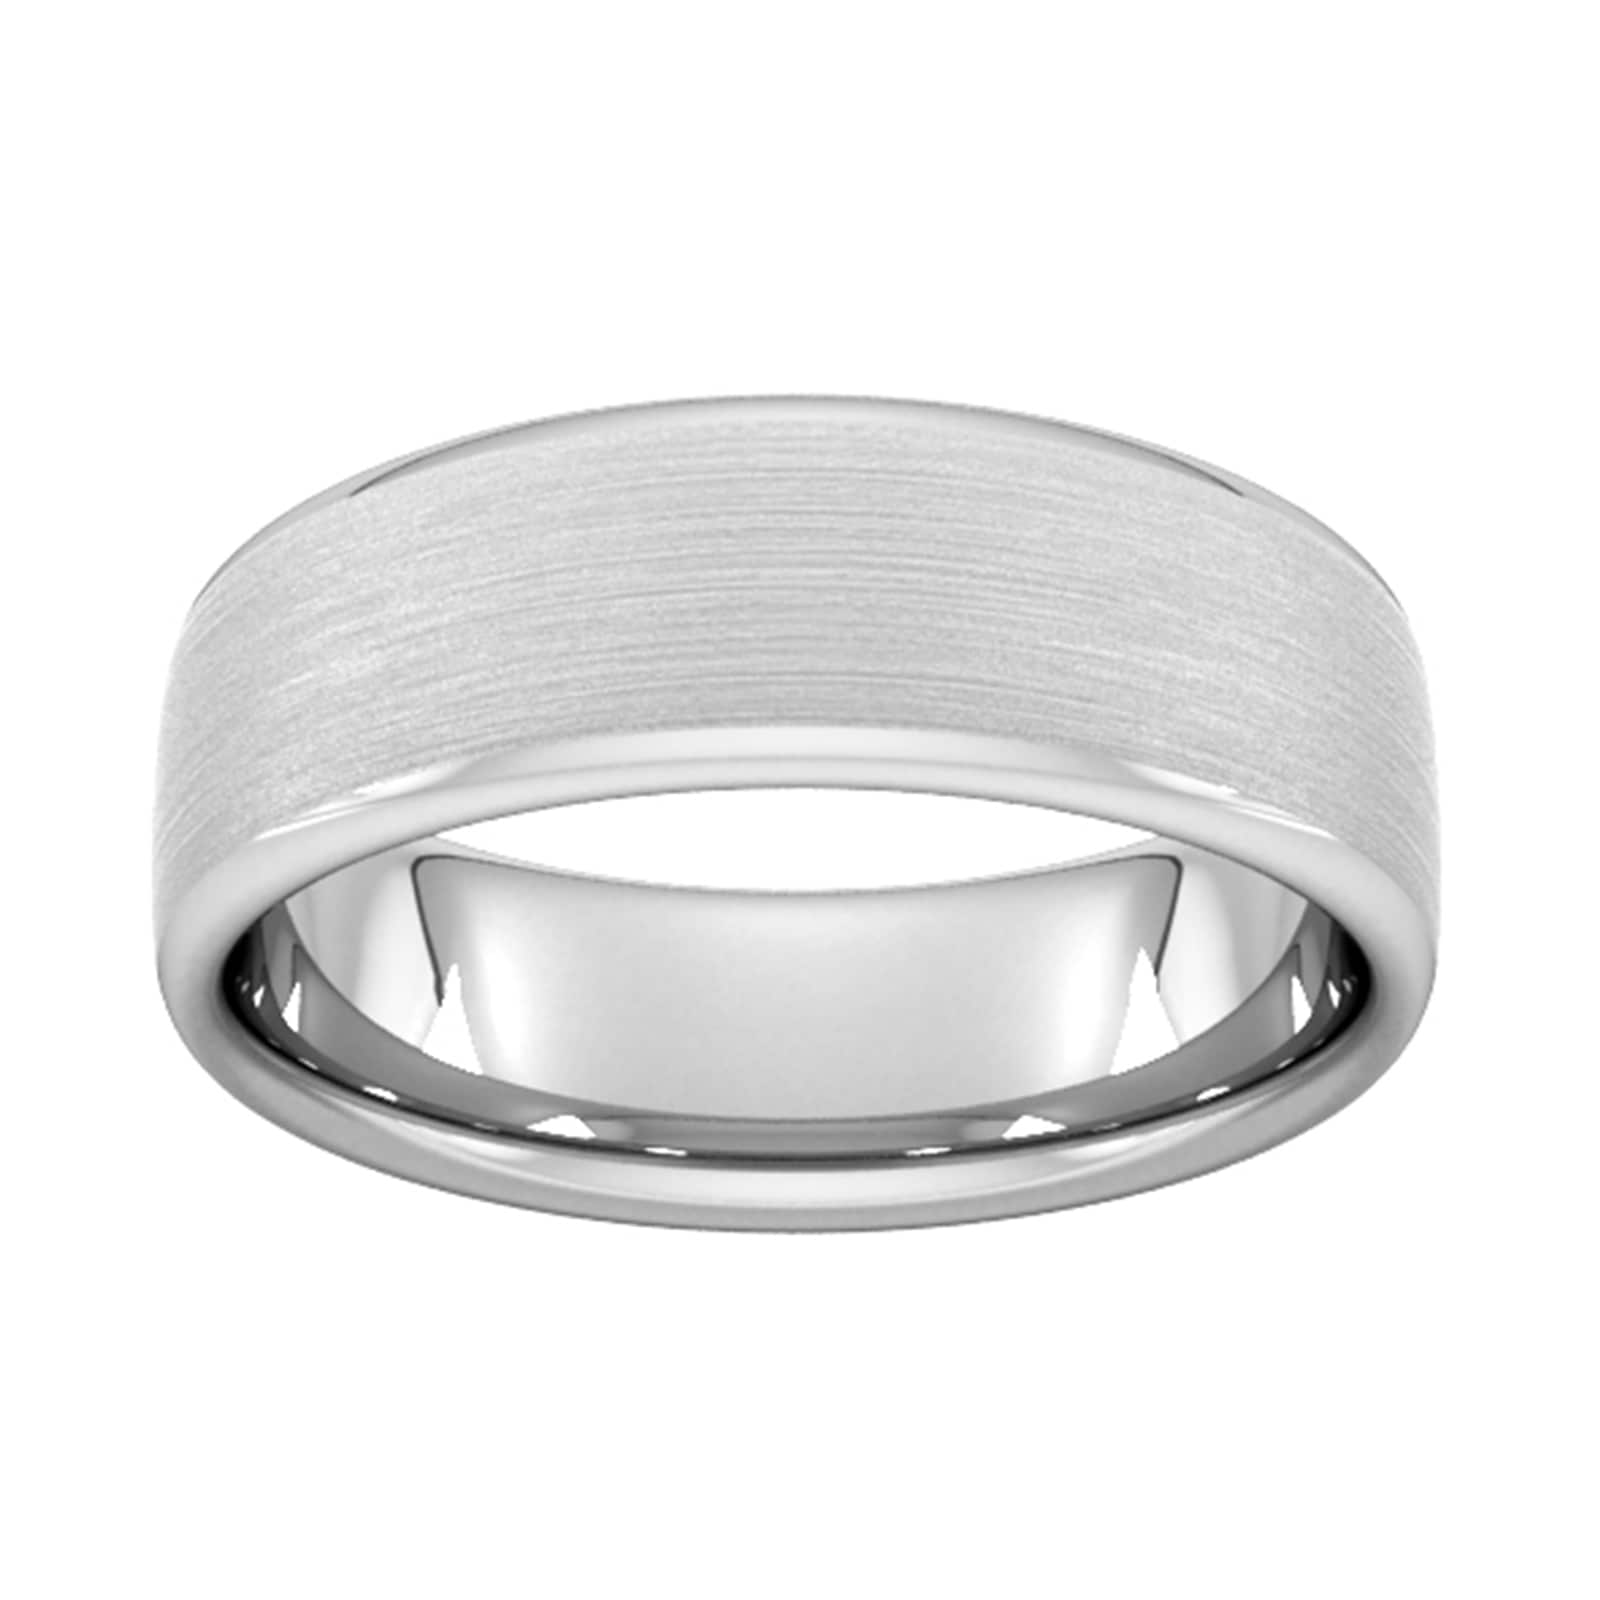 7mm Traditional Court Standard Matt Finished Wedding Ring In 9 Carat White Gold - Ring Size M